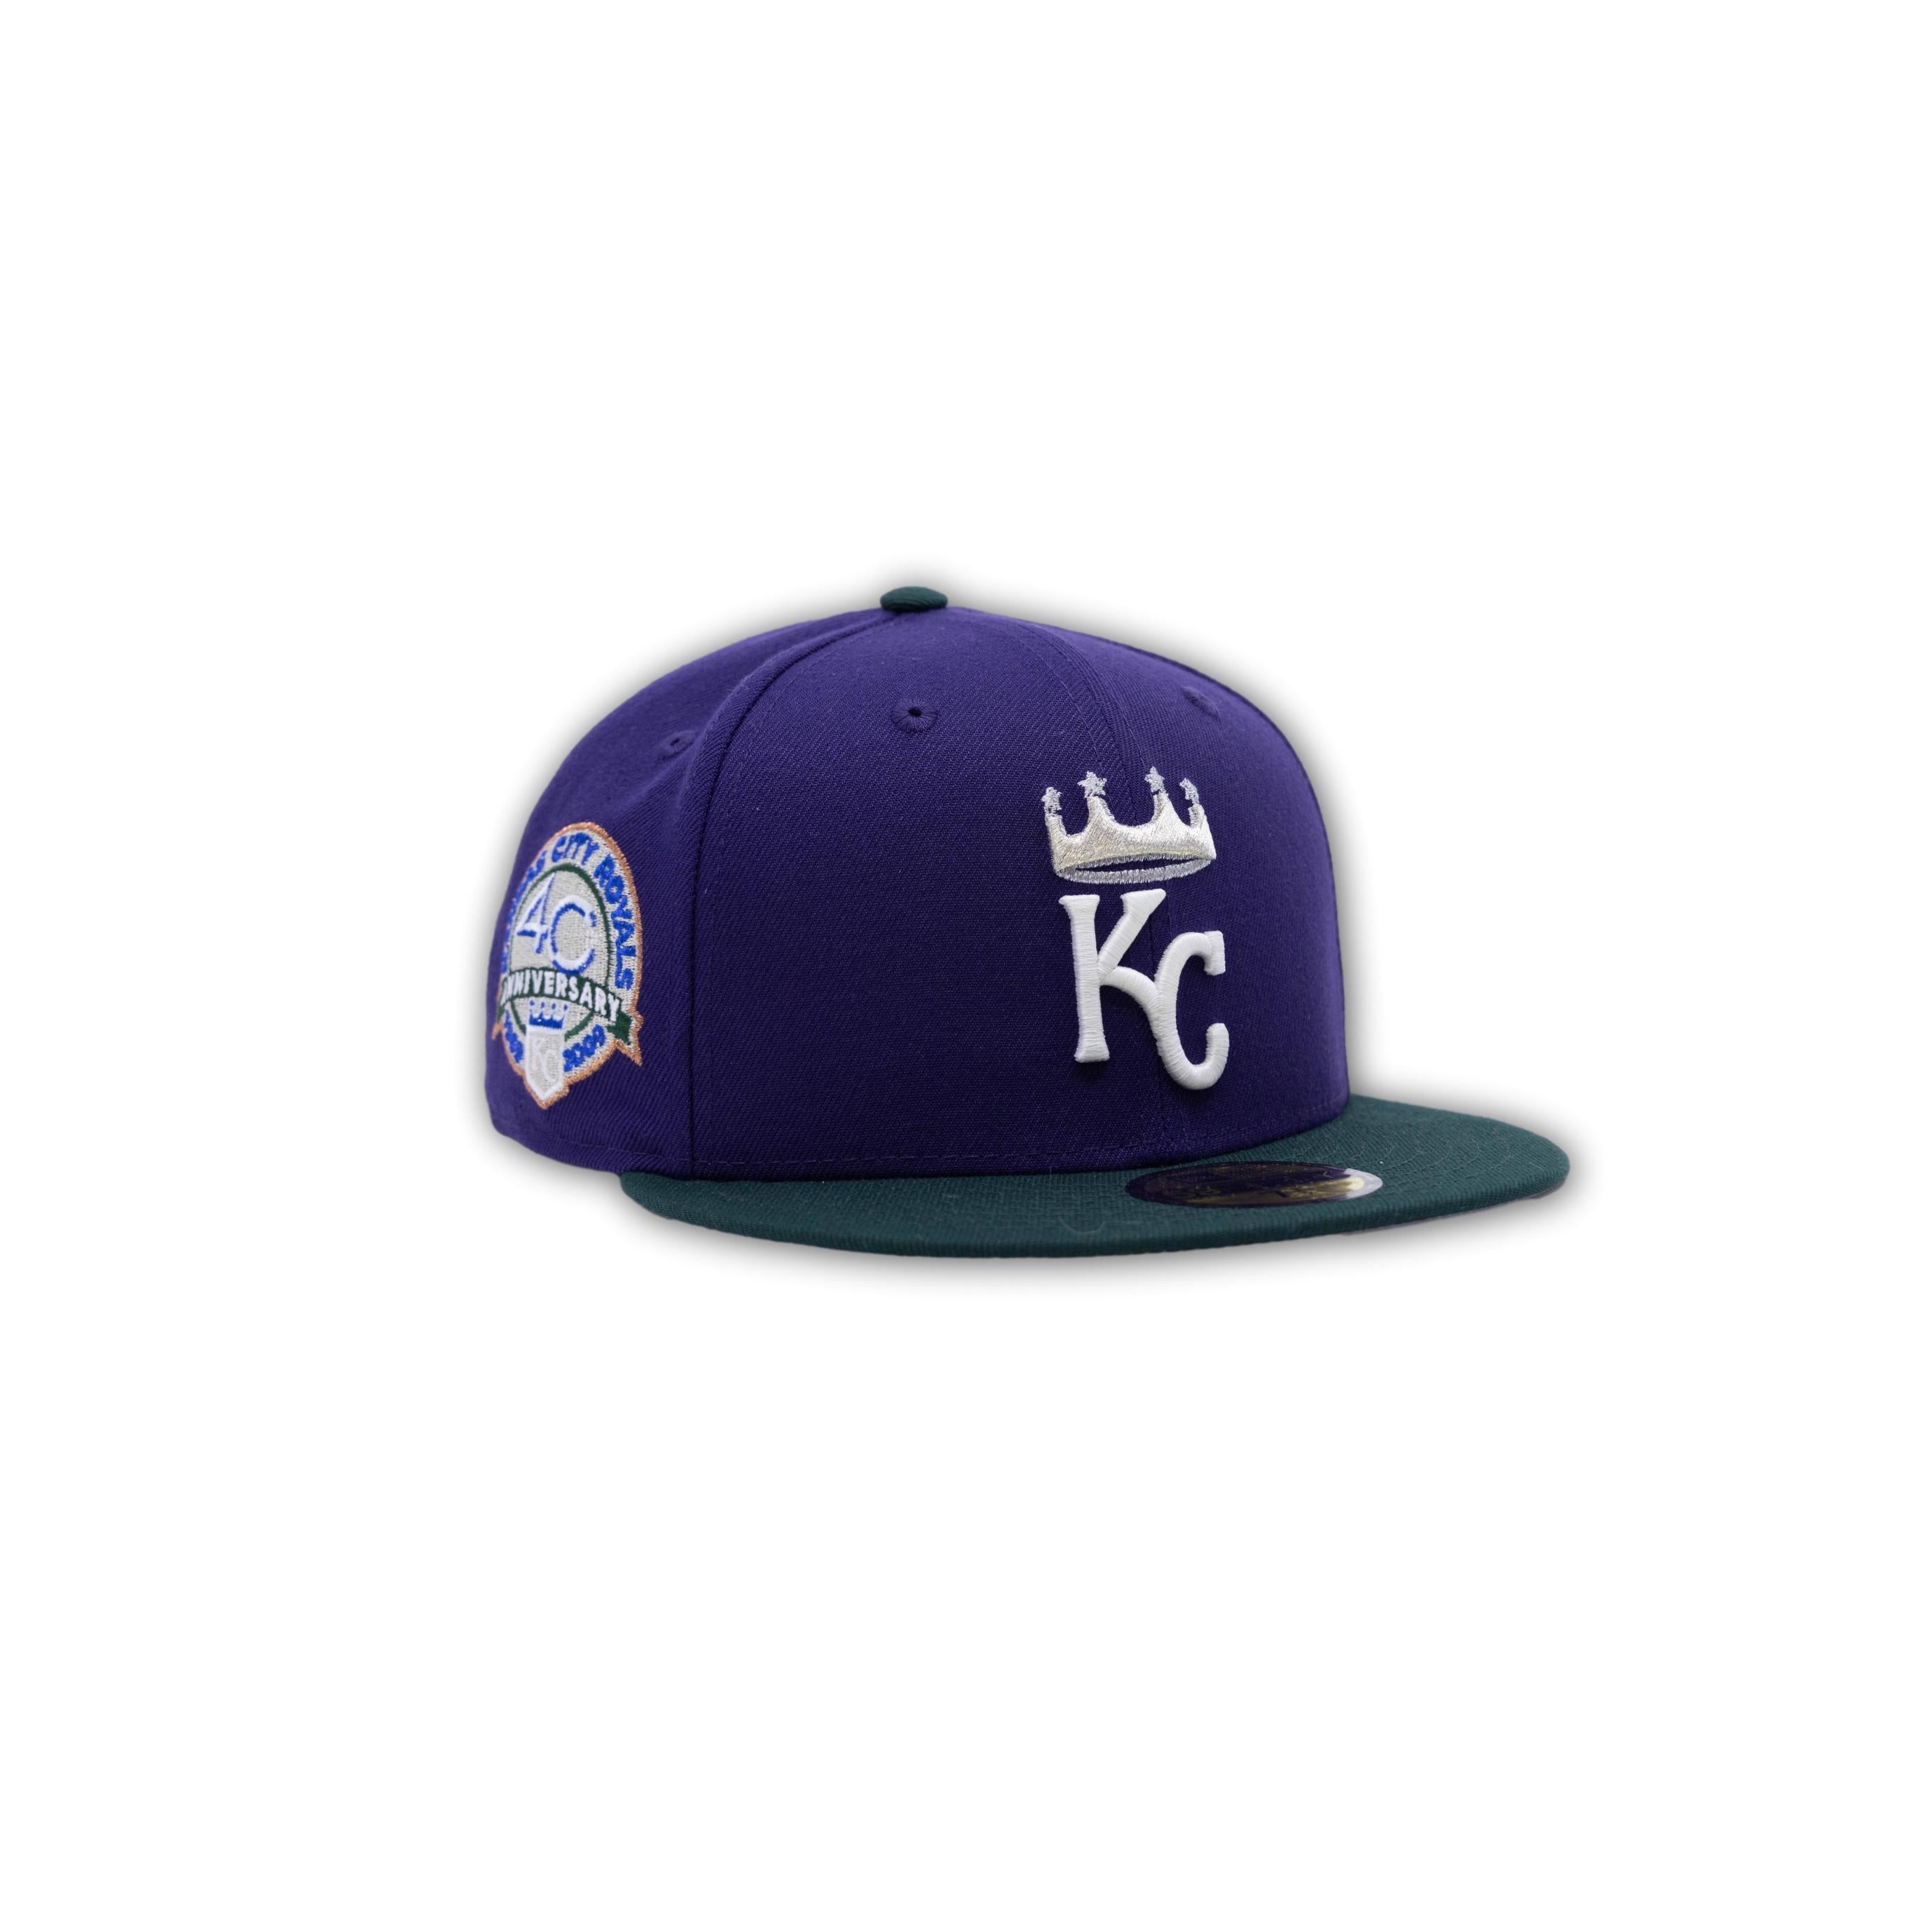 New Era Kansas City Royals 40th Anniversary Patch Fitted